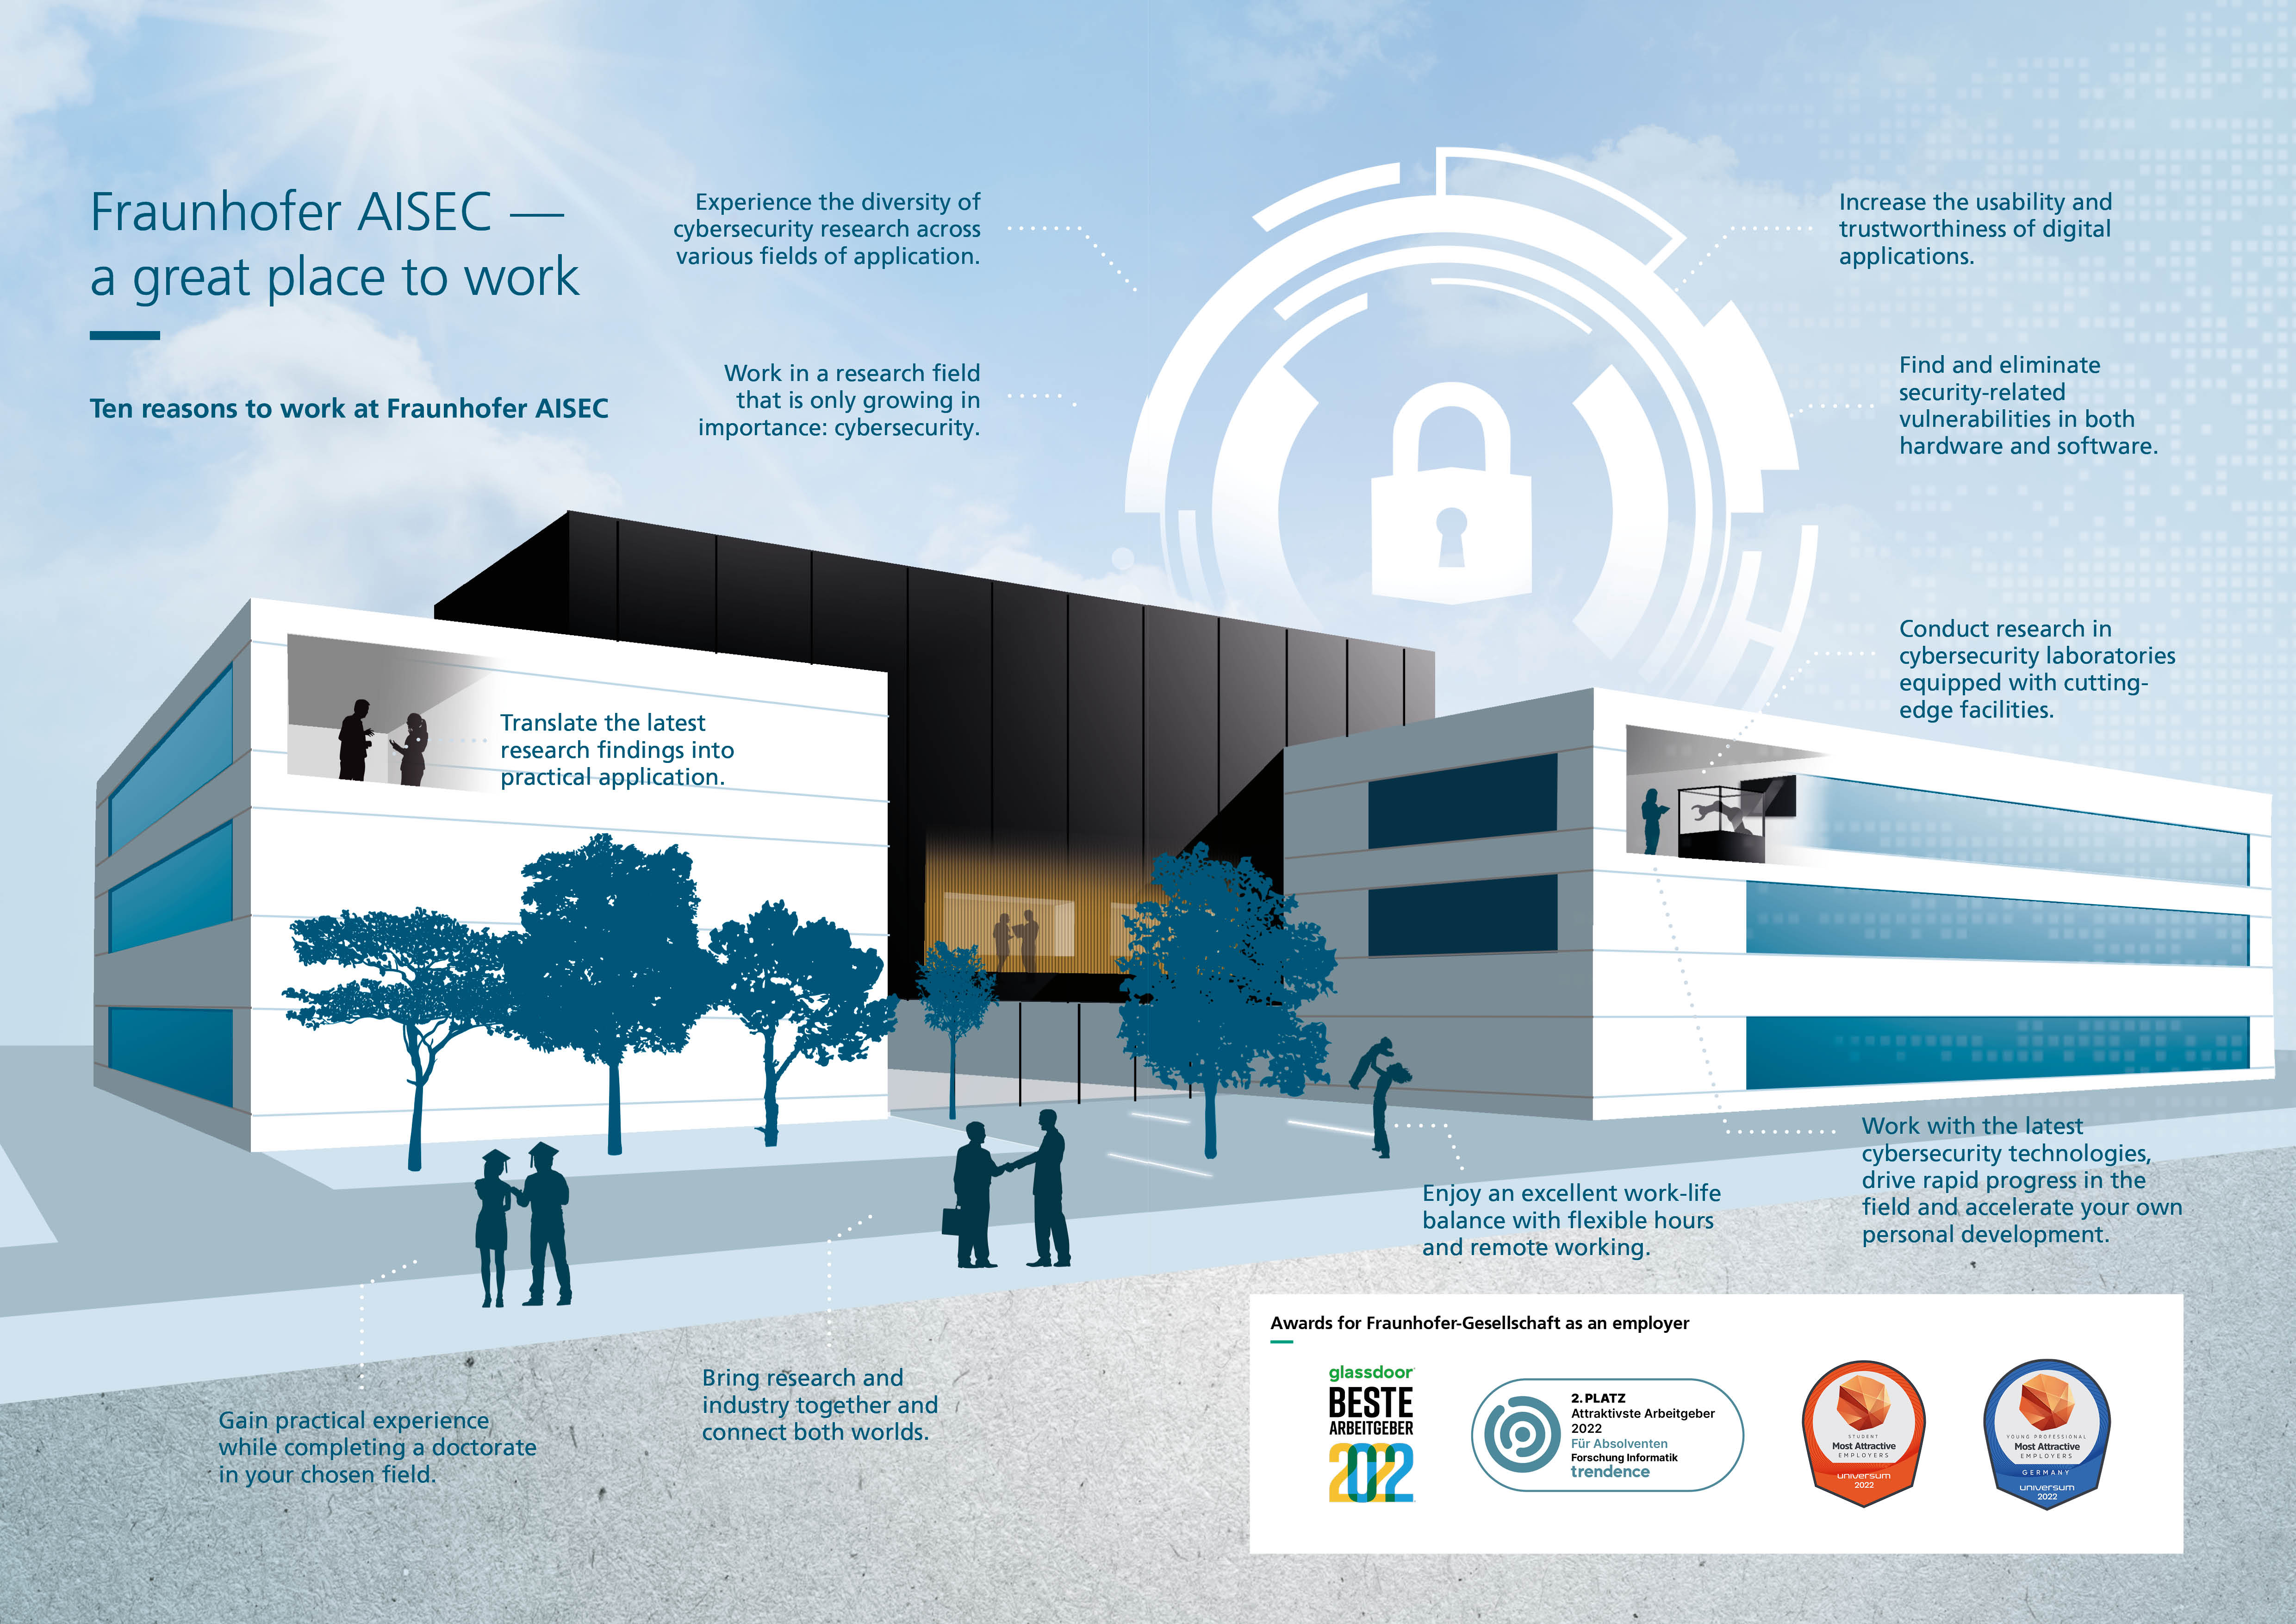 image Fraunhofer AISEC - a great place to work 